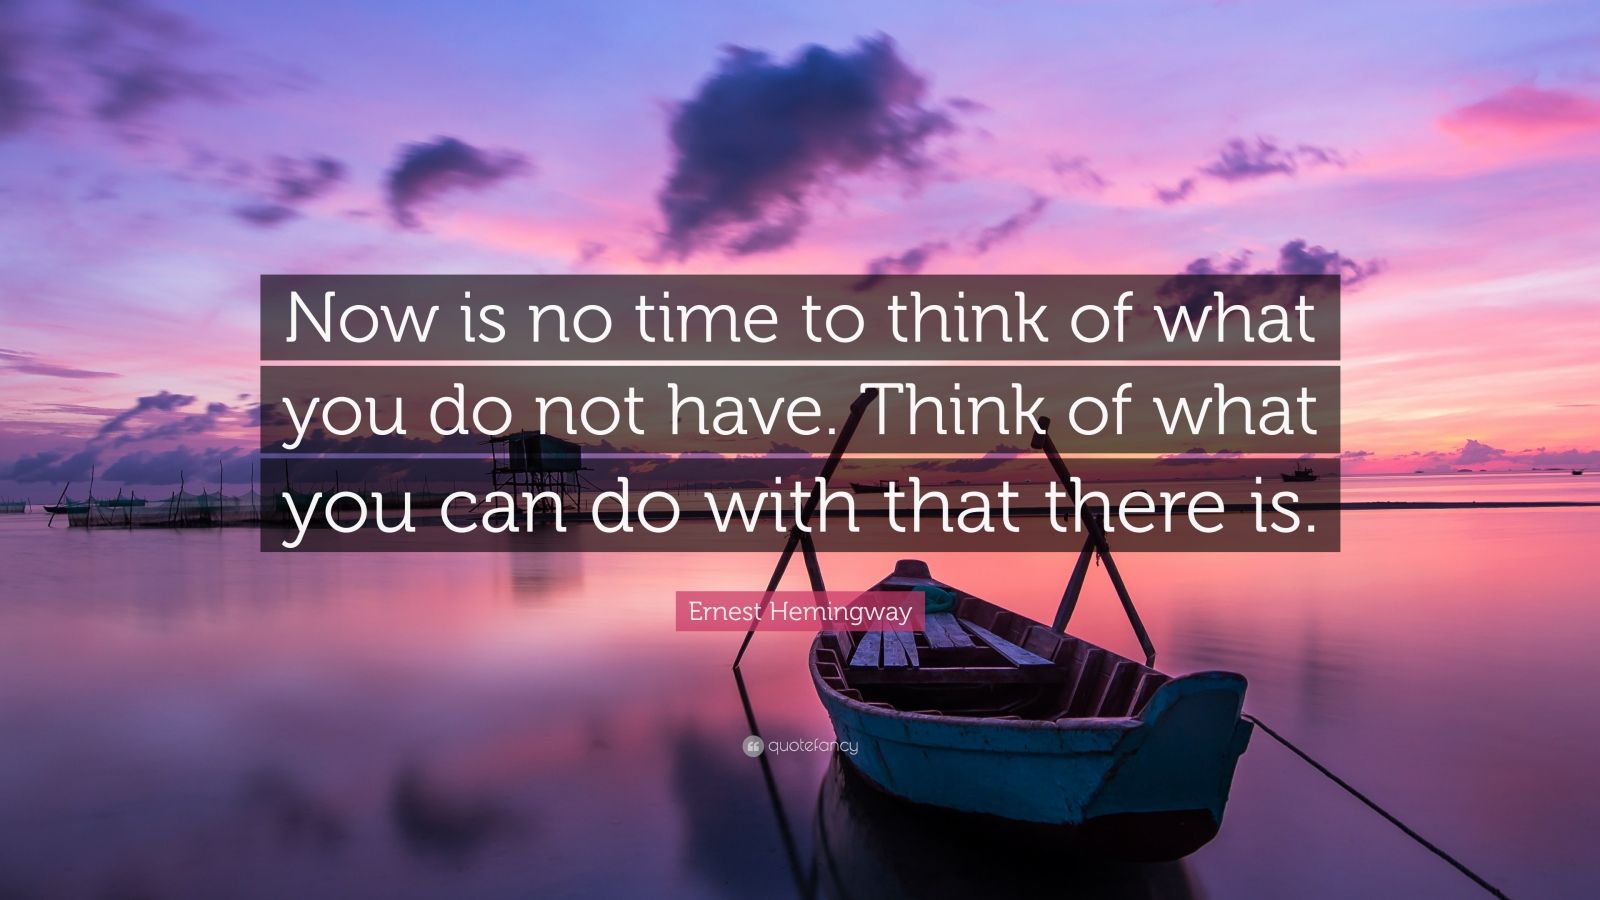 Ernest Hemingway Quote: “Now is no time to think of what you do not